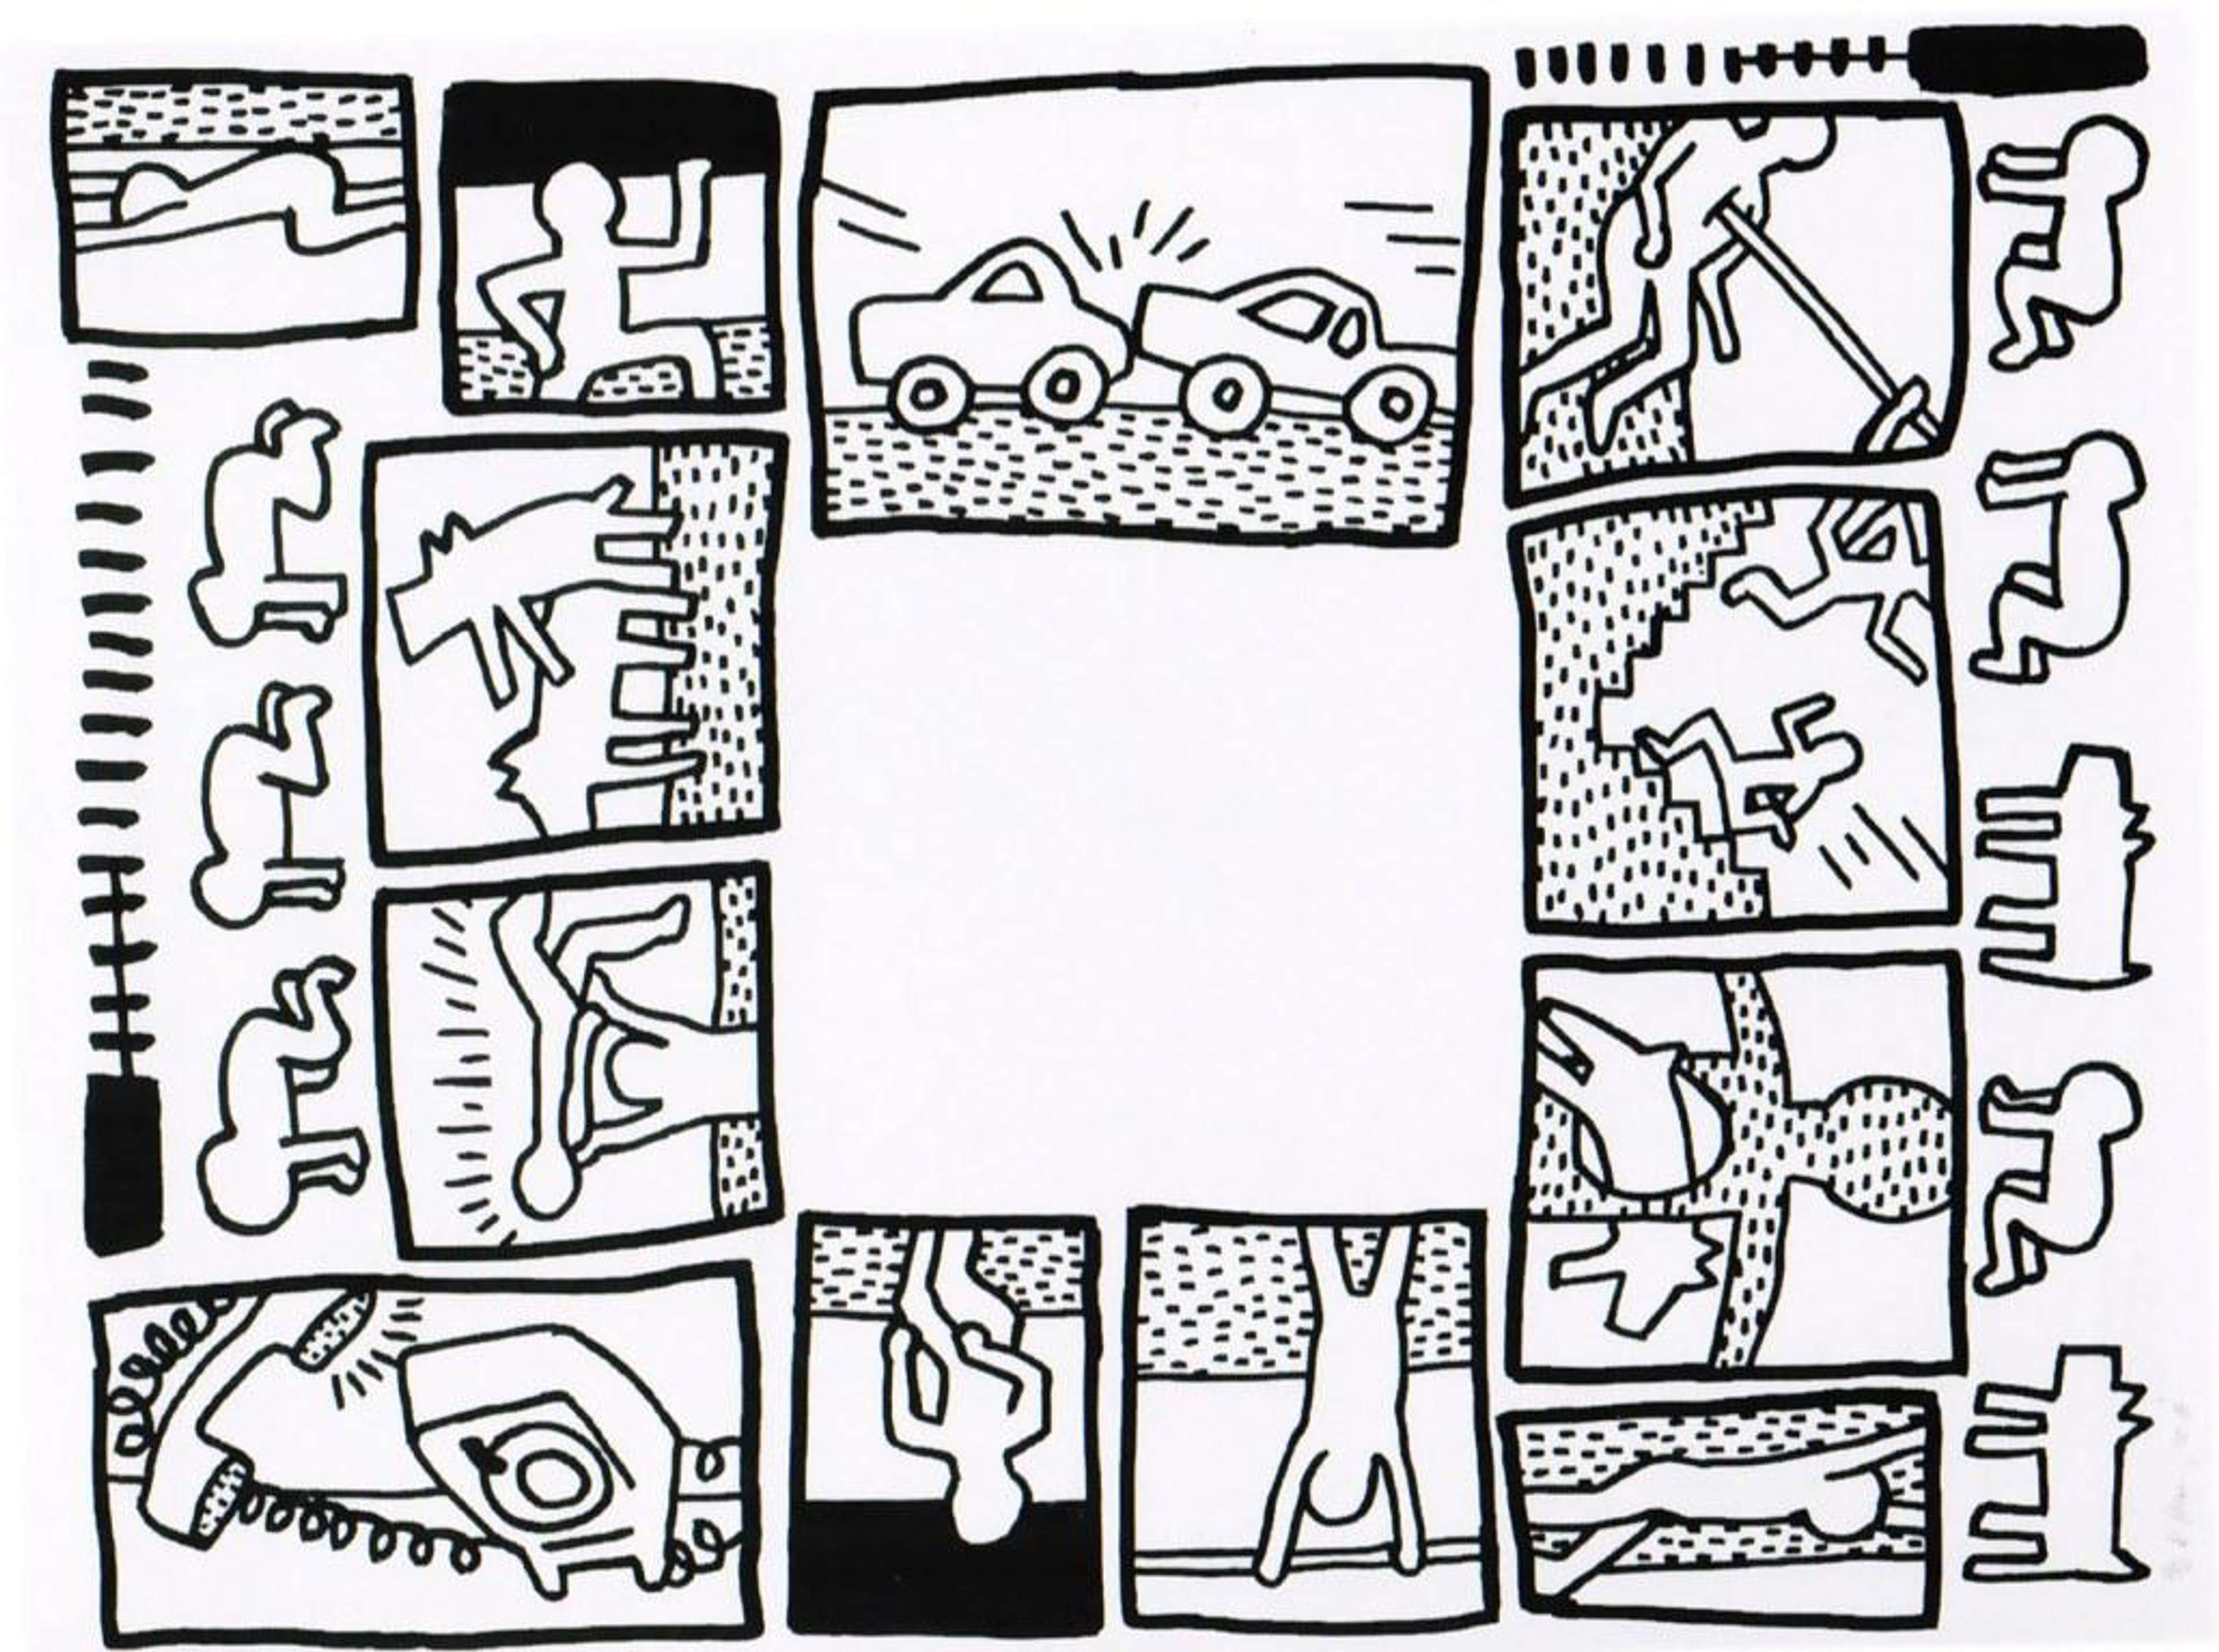 Keith Haring’s The Blueprint Drawings 4. A Pop Art screenprint of a black and white comic strip of various scenes including cars, a telephone and figures.